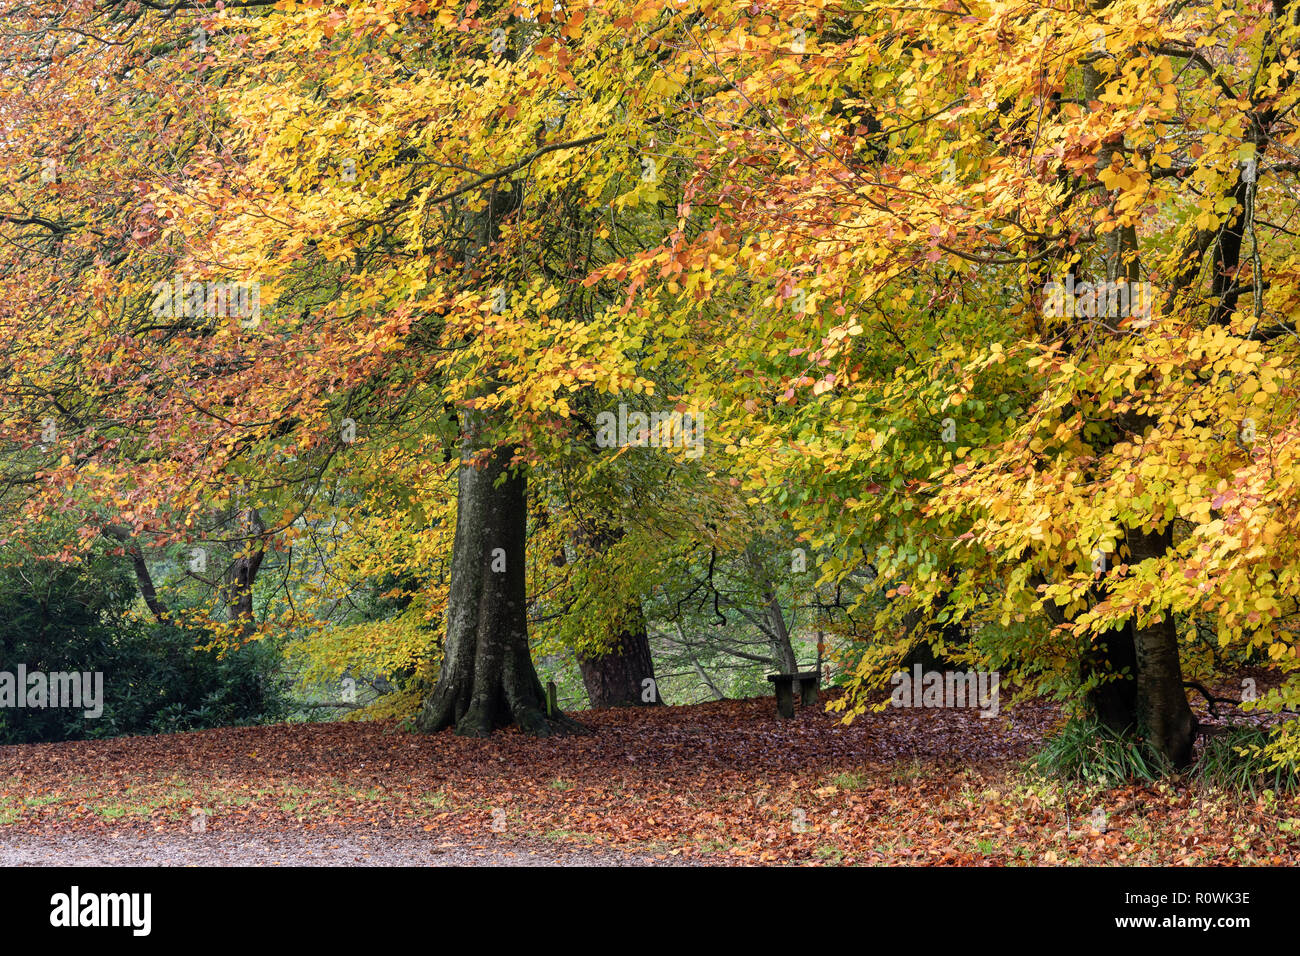 Beech trees in Shearwater forest on The Longleat Estate in autumn, Wiltshire, England, UK Stock Photo